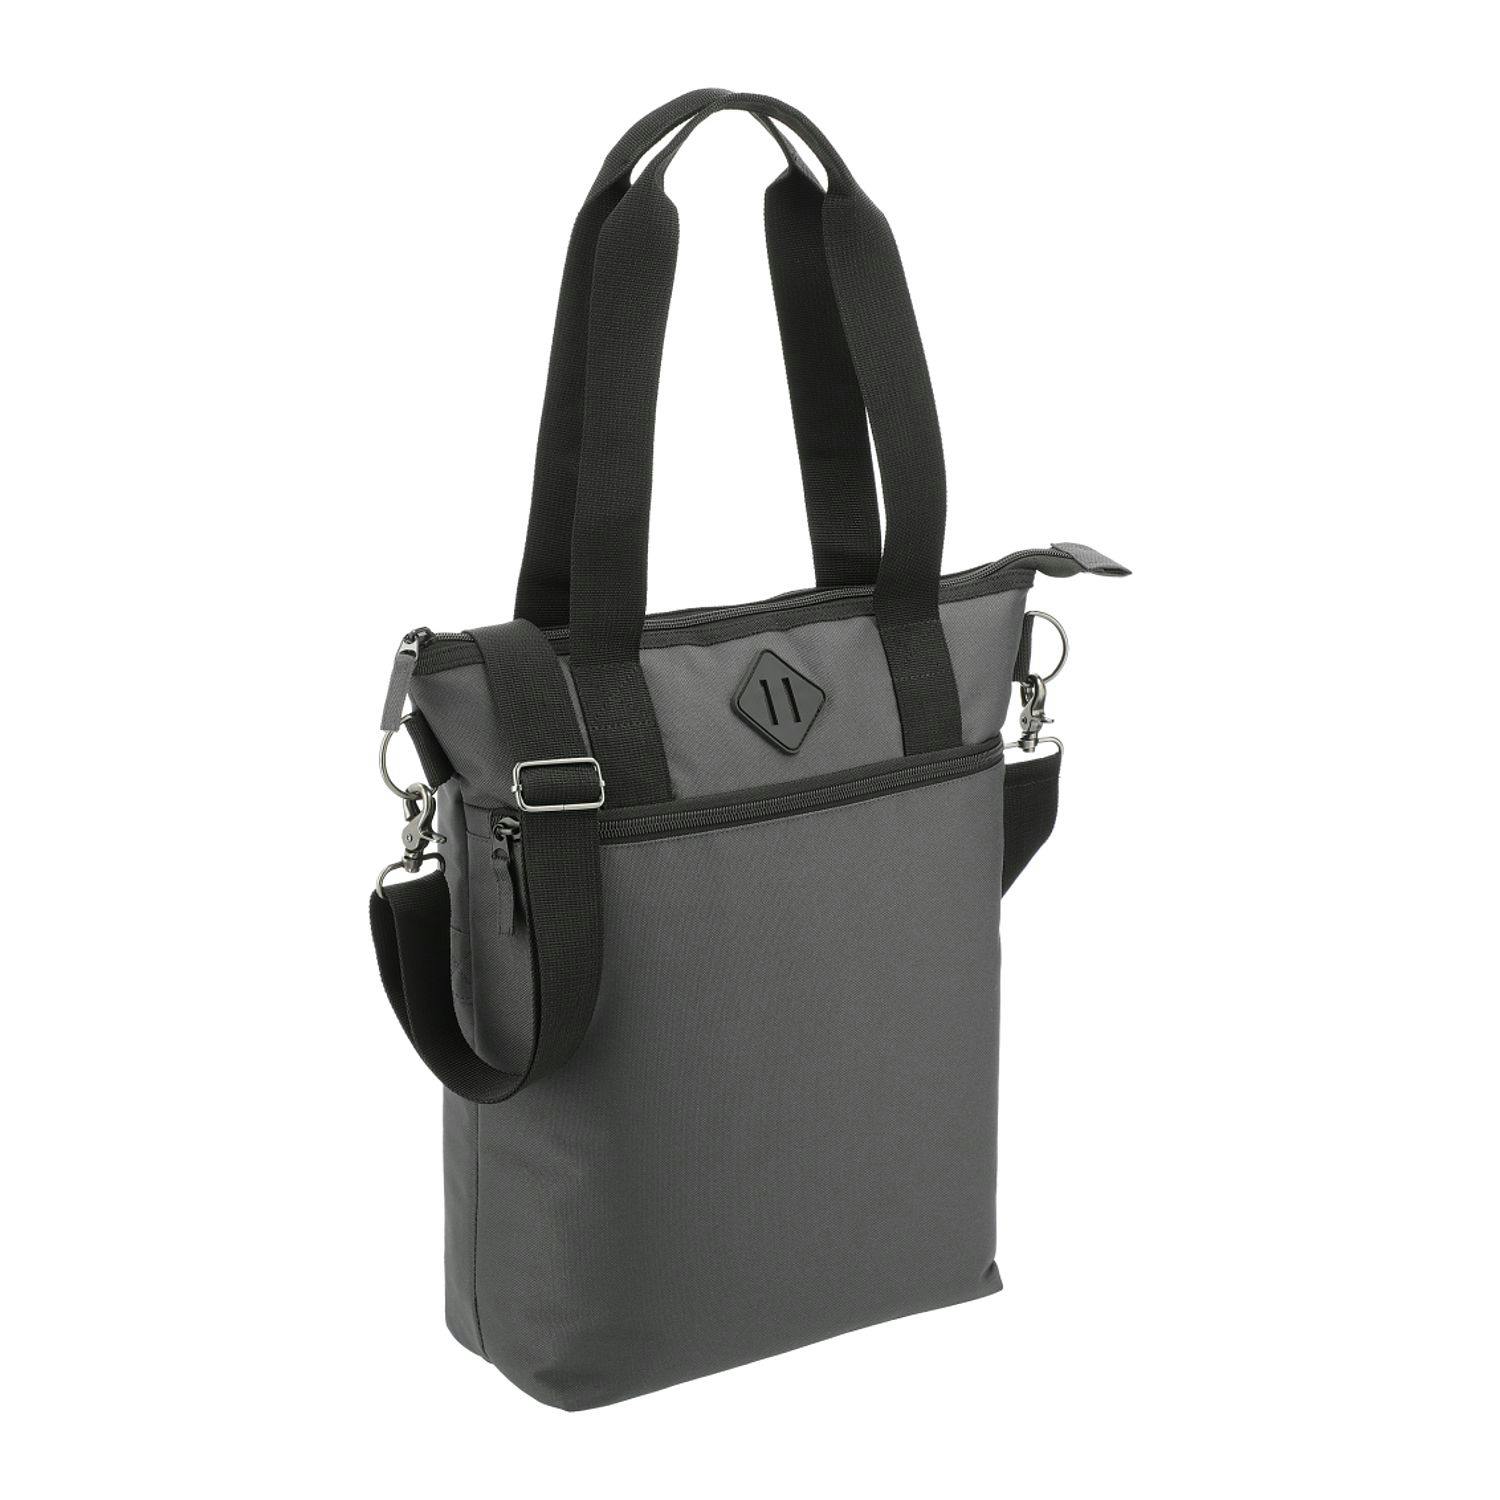 Repreve® Ocean Computer Tote - additional Image 3